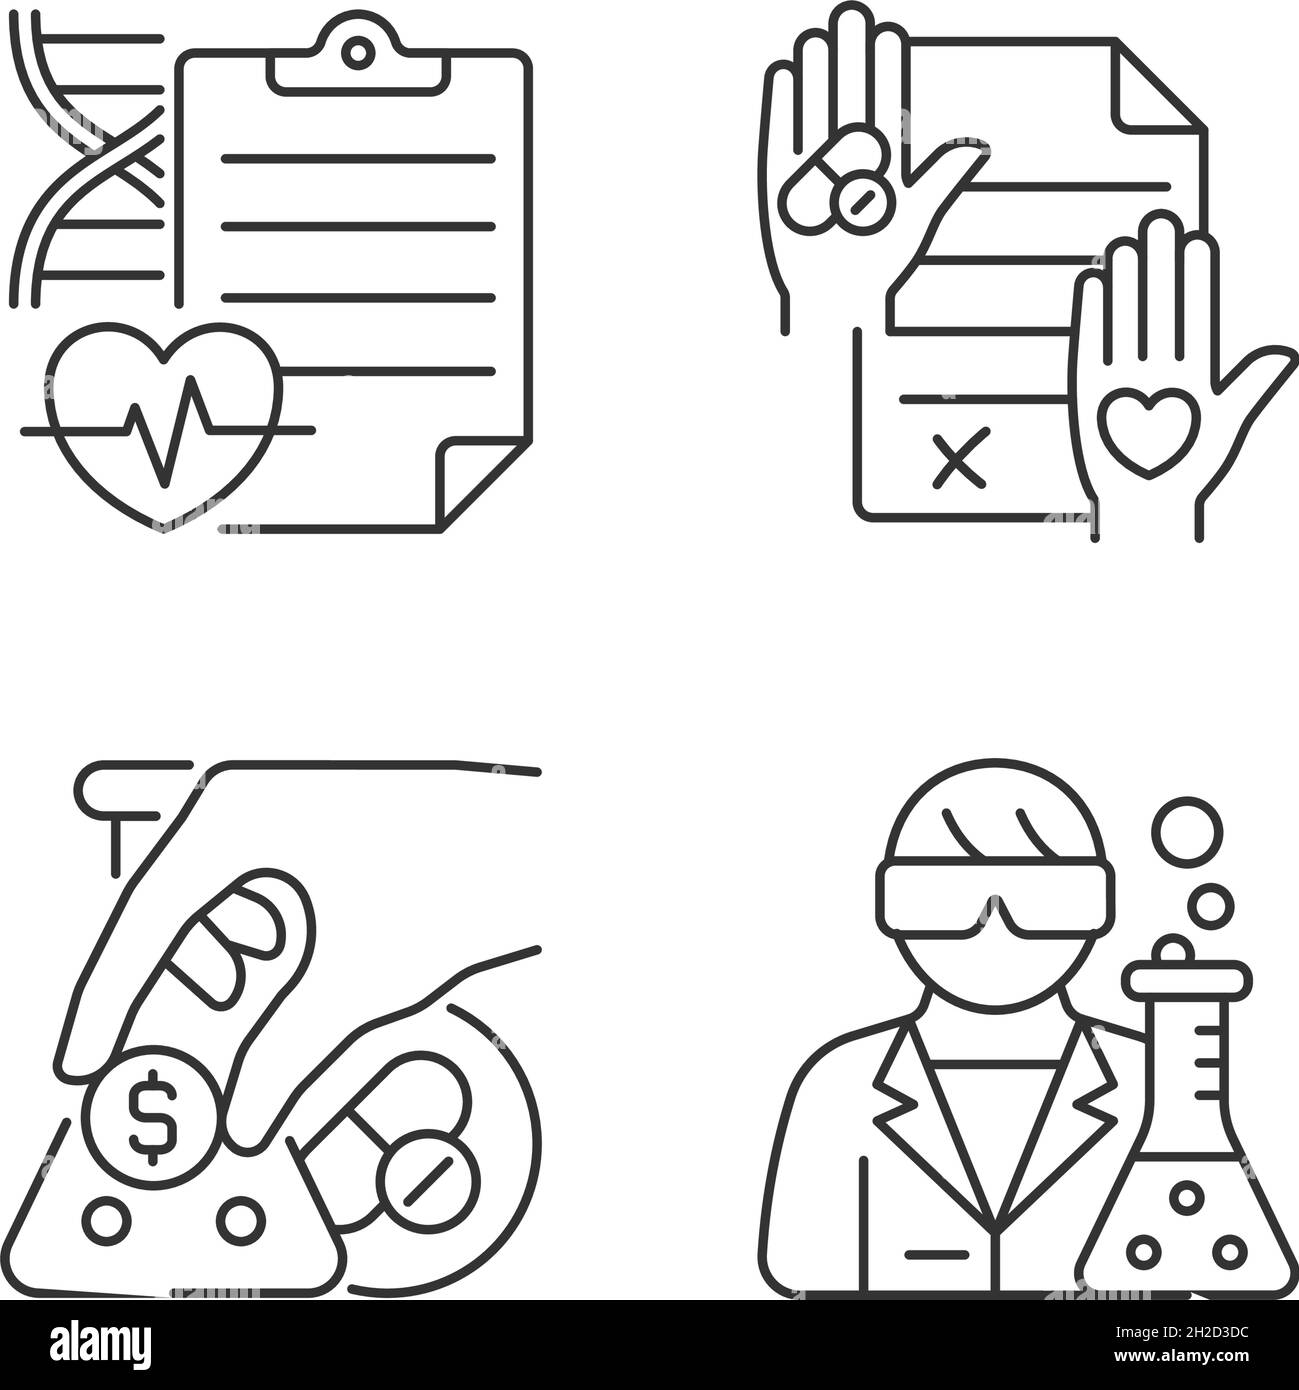 Experimental research linear icons set Stock Vector